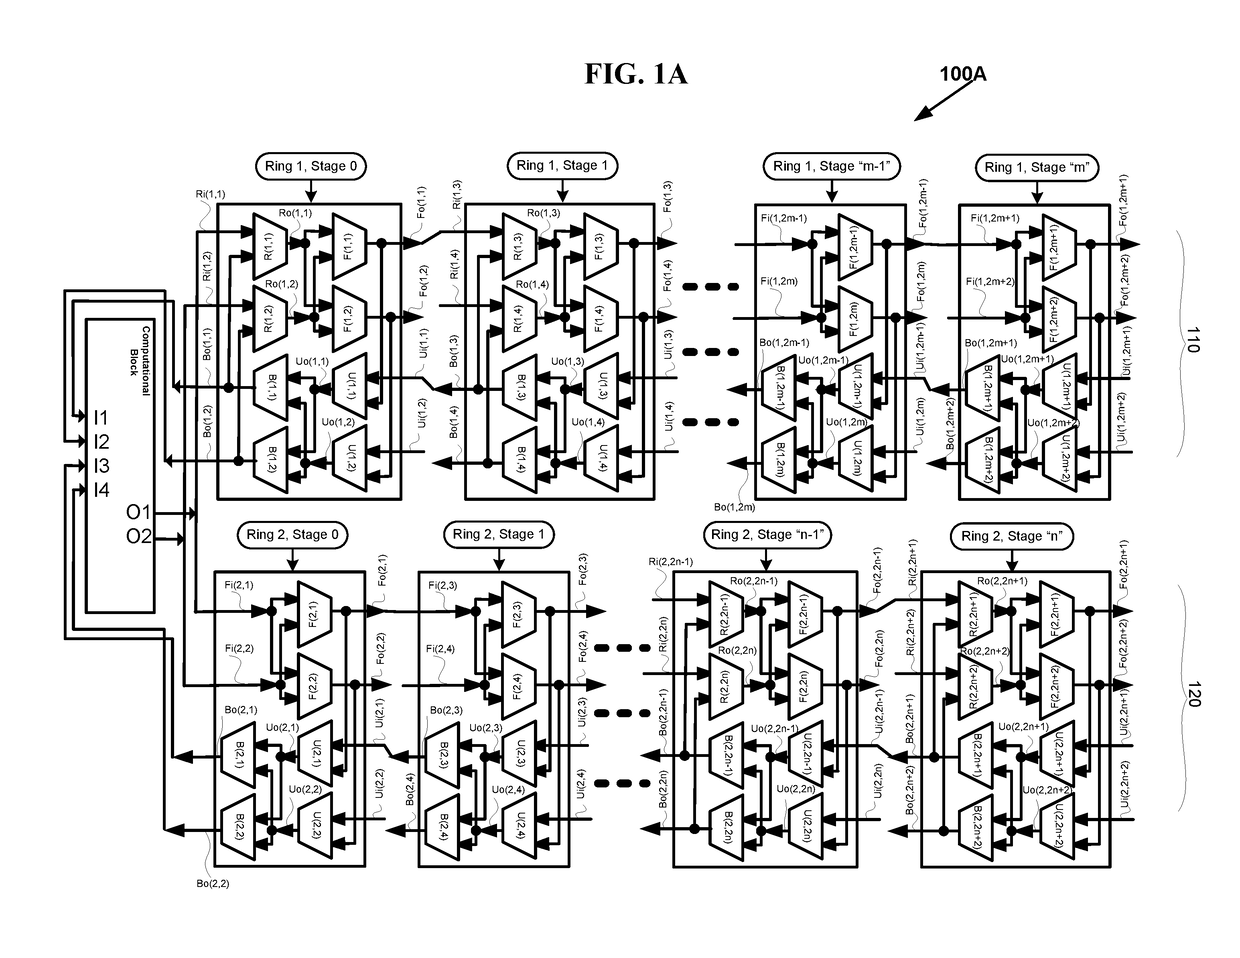 AUTOMATIC MULTI-STAGE FABRIC GENERATION FOR FPGAs